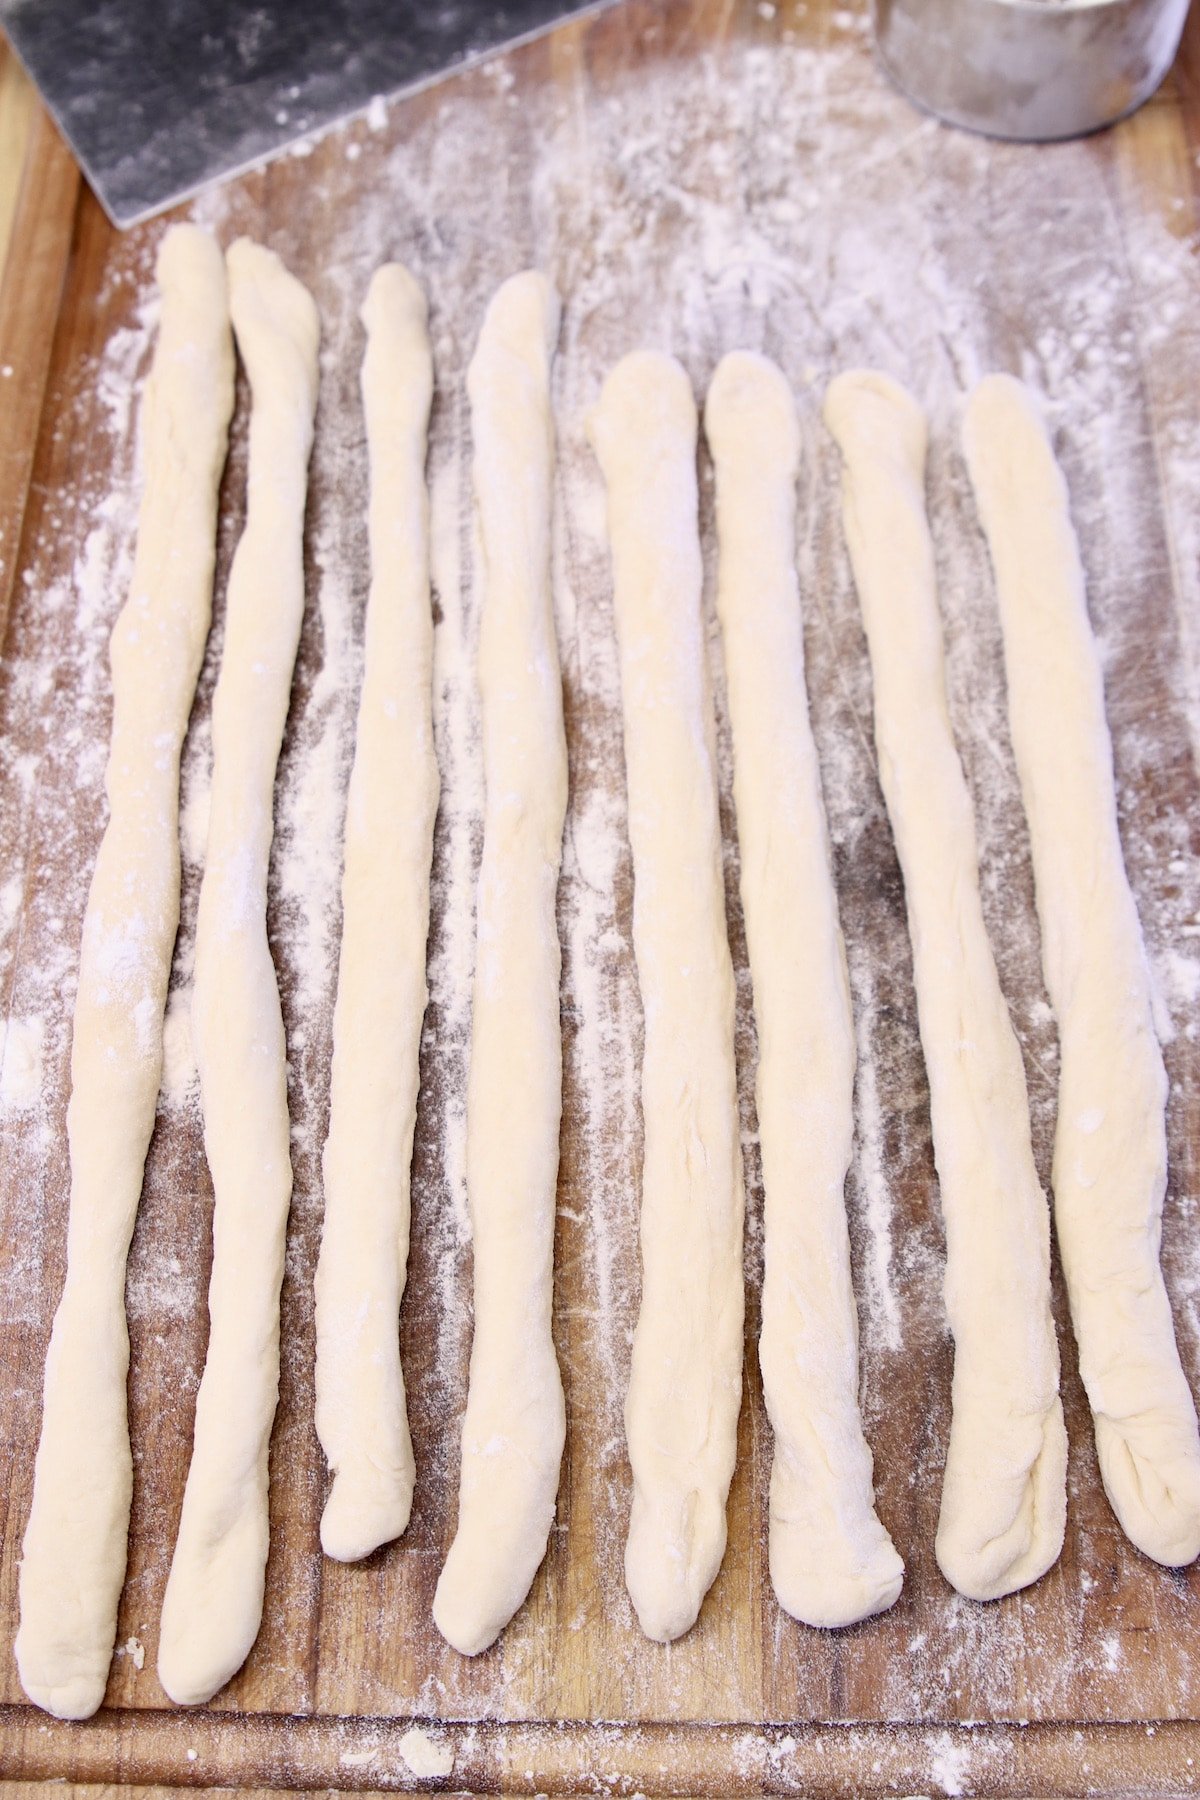 8 dough ropes on a cutting board for pretzel dogs.